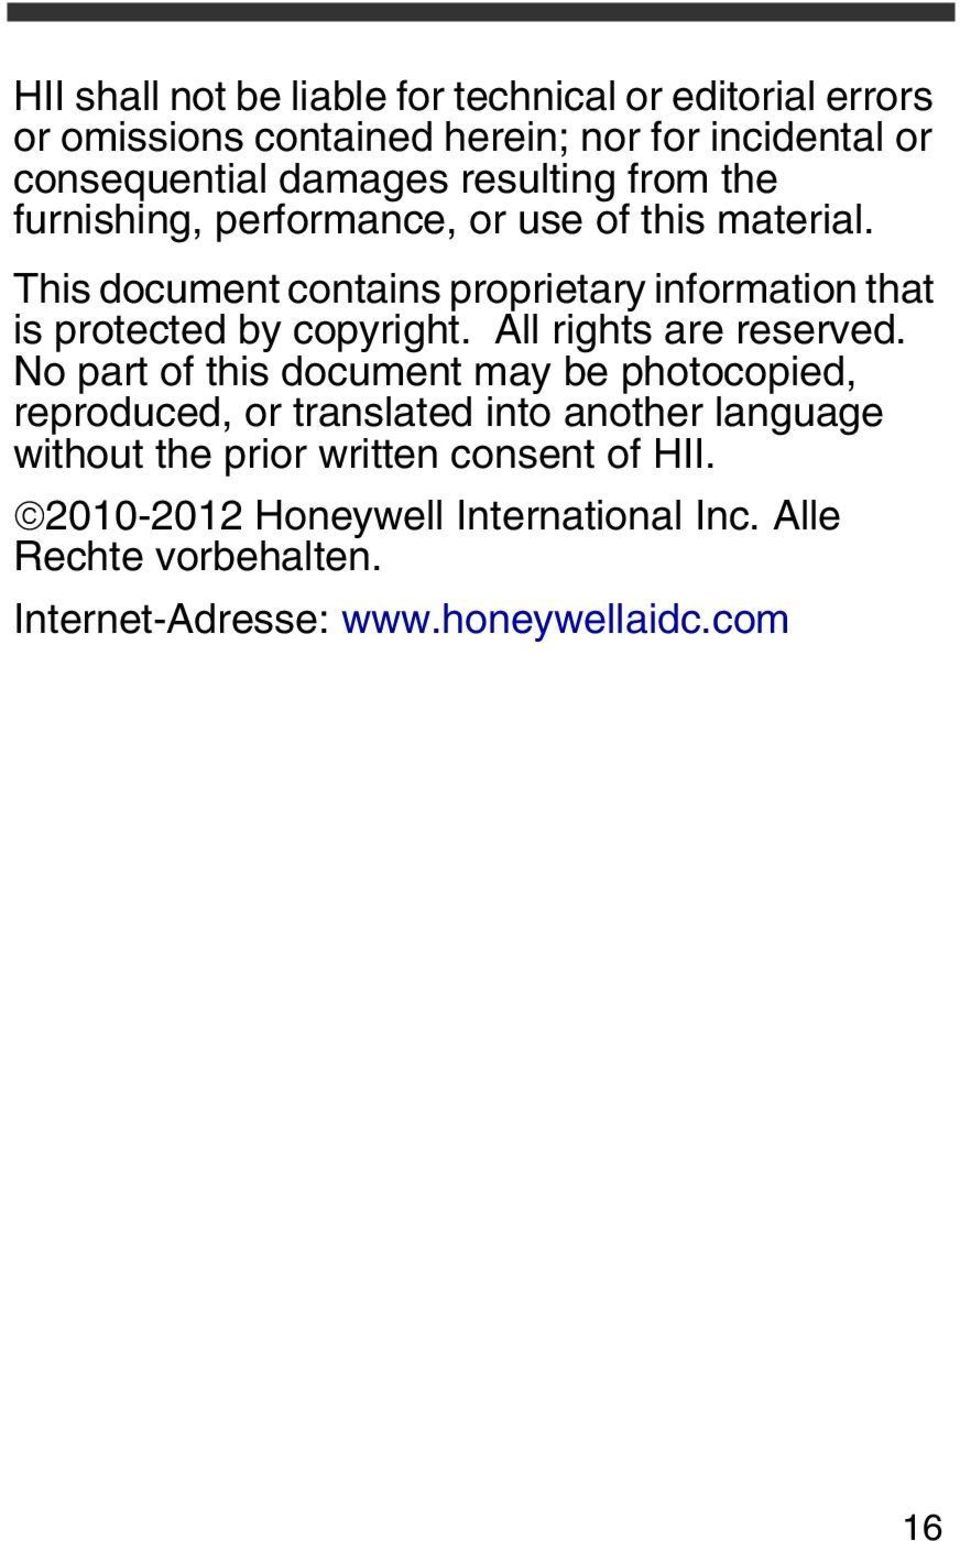 This document contains proprietary information that is protected by copyright. All rights are reserved.